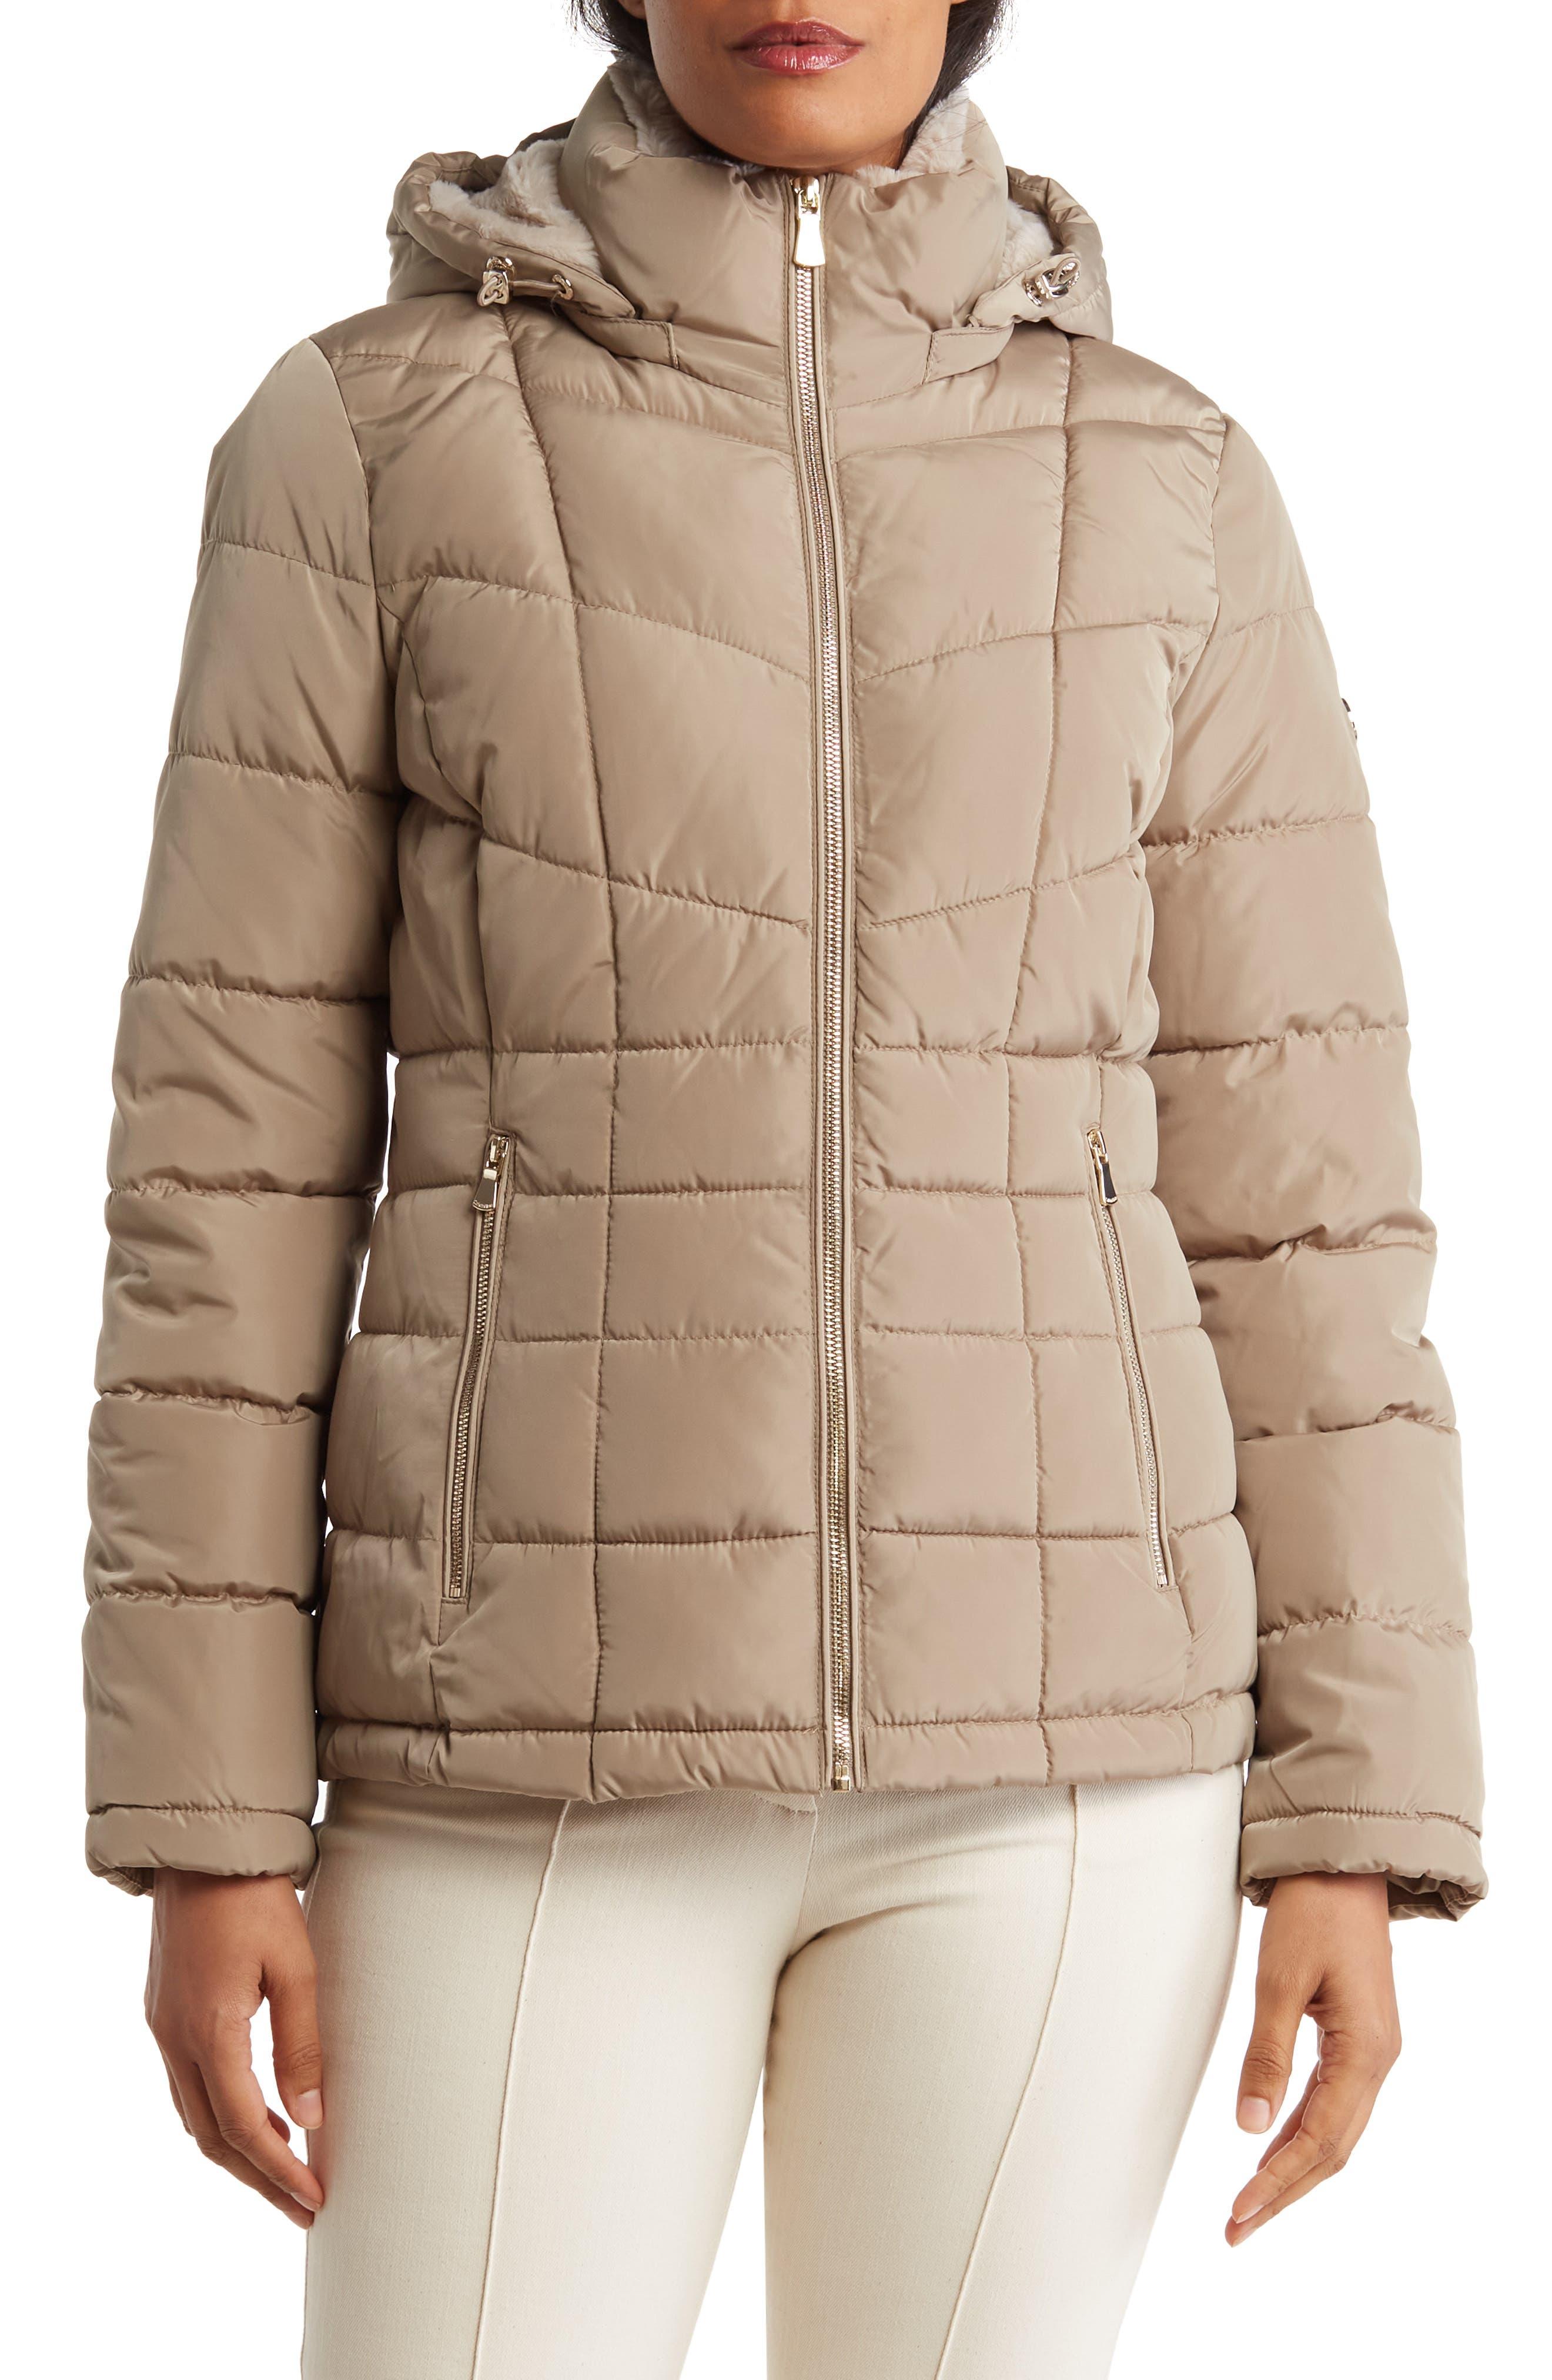 Calvin Klein Water Resistant Puffer Jacket With Faux Fur Lining in